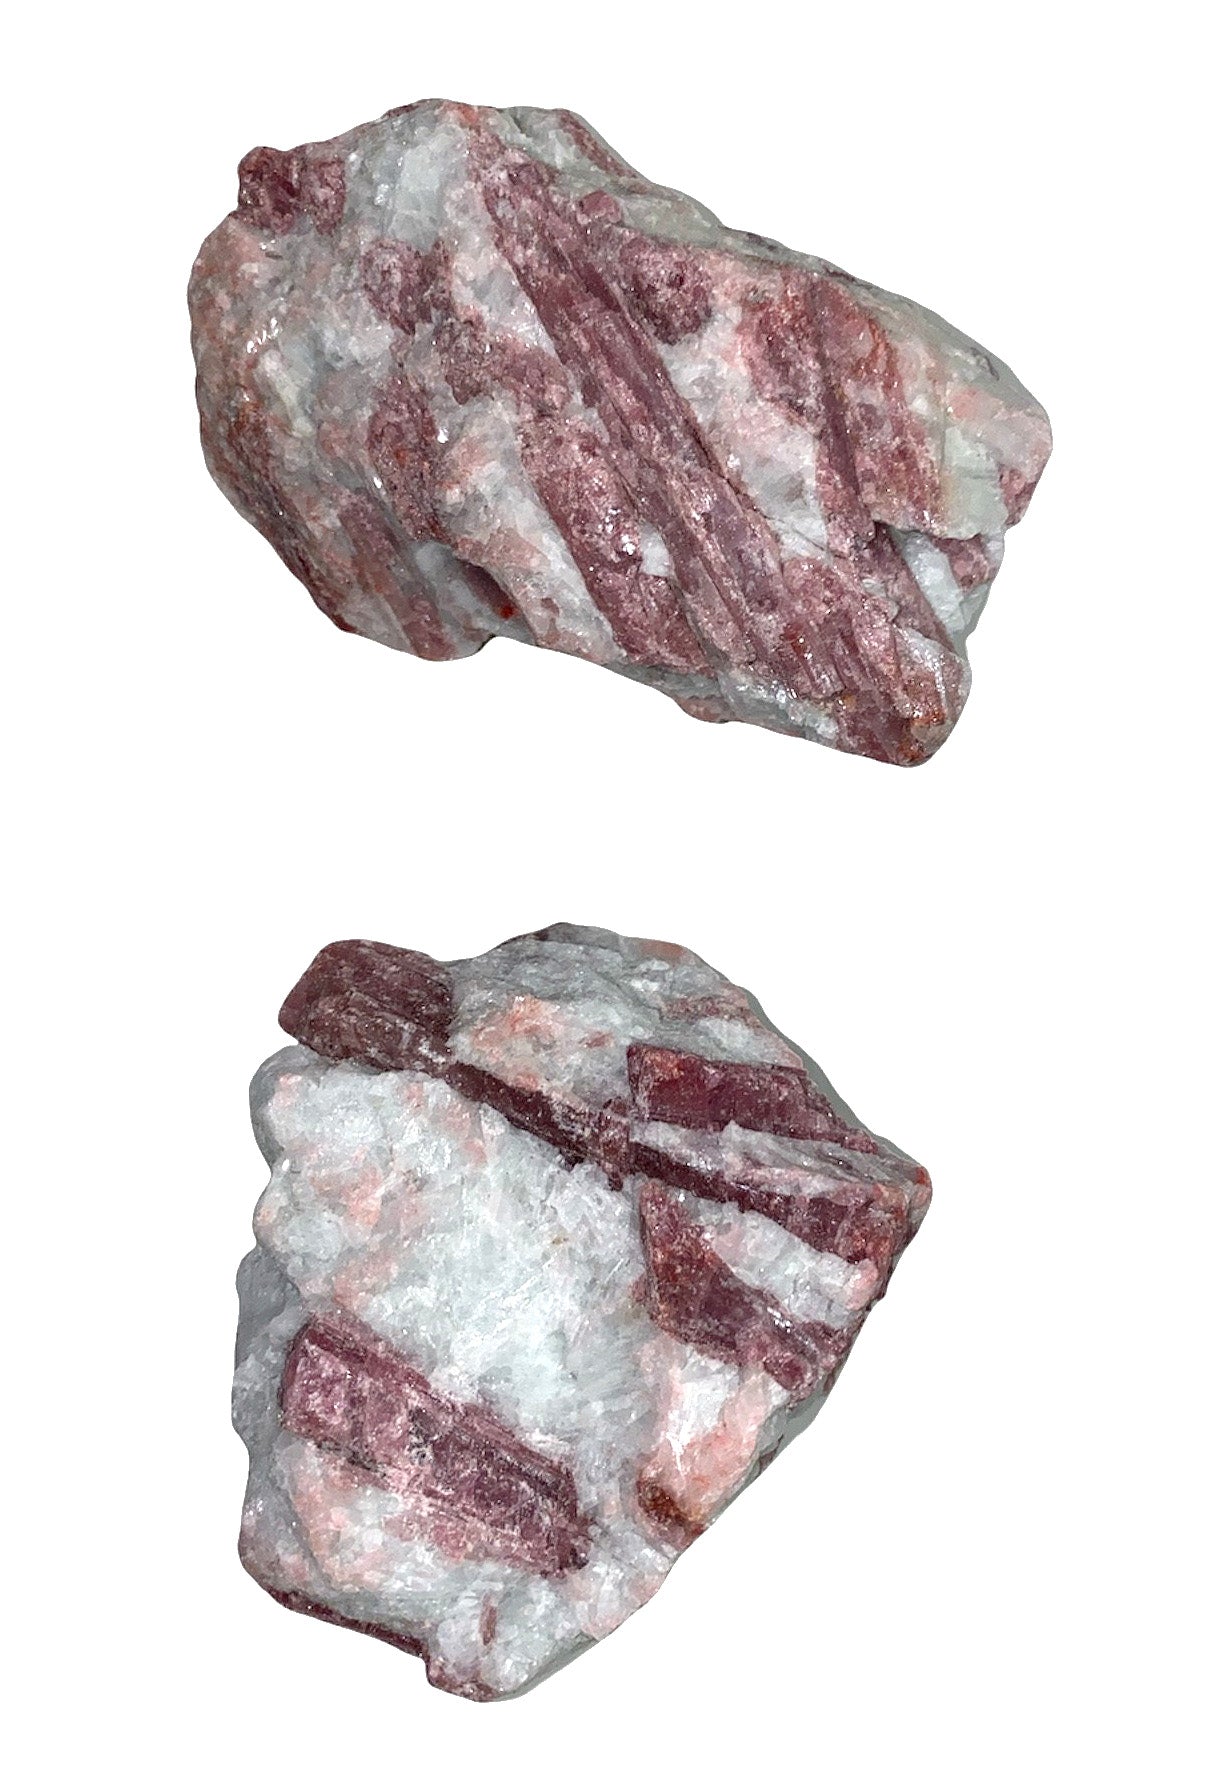 Natural Rough Pink Tourmaline IN MATRIX Raw Stone - 7 - 10cm Assorted Sizes - Sold by the gram - China - NEW921